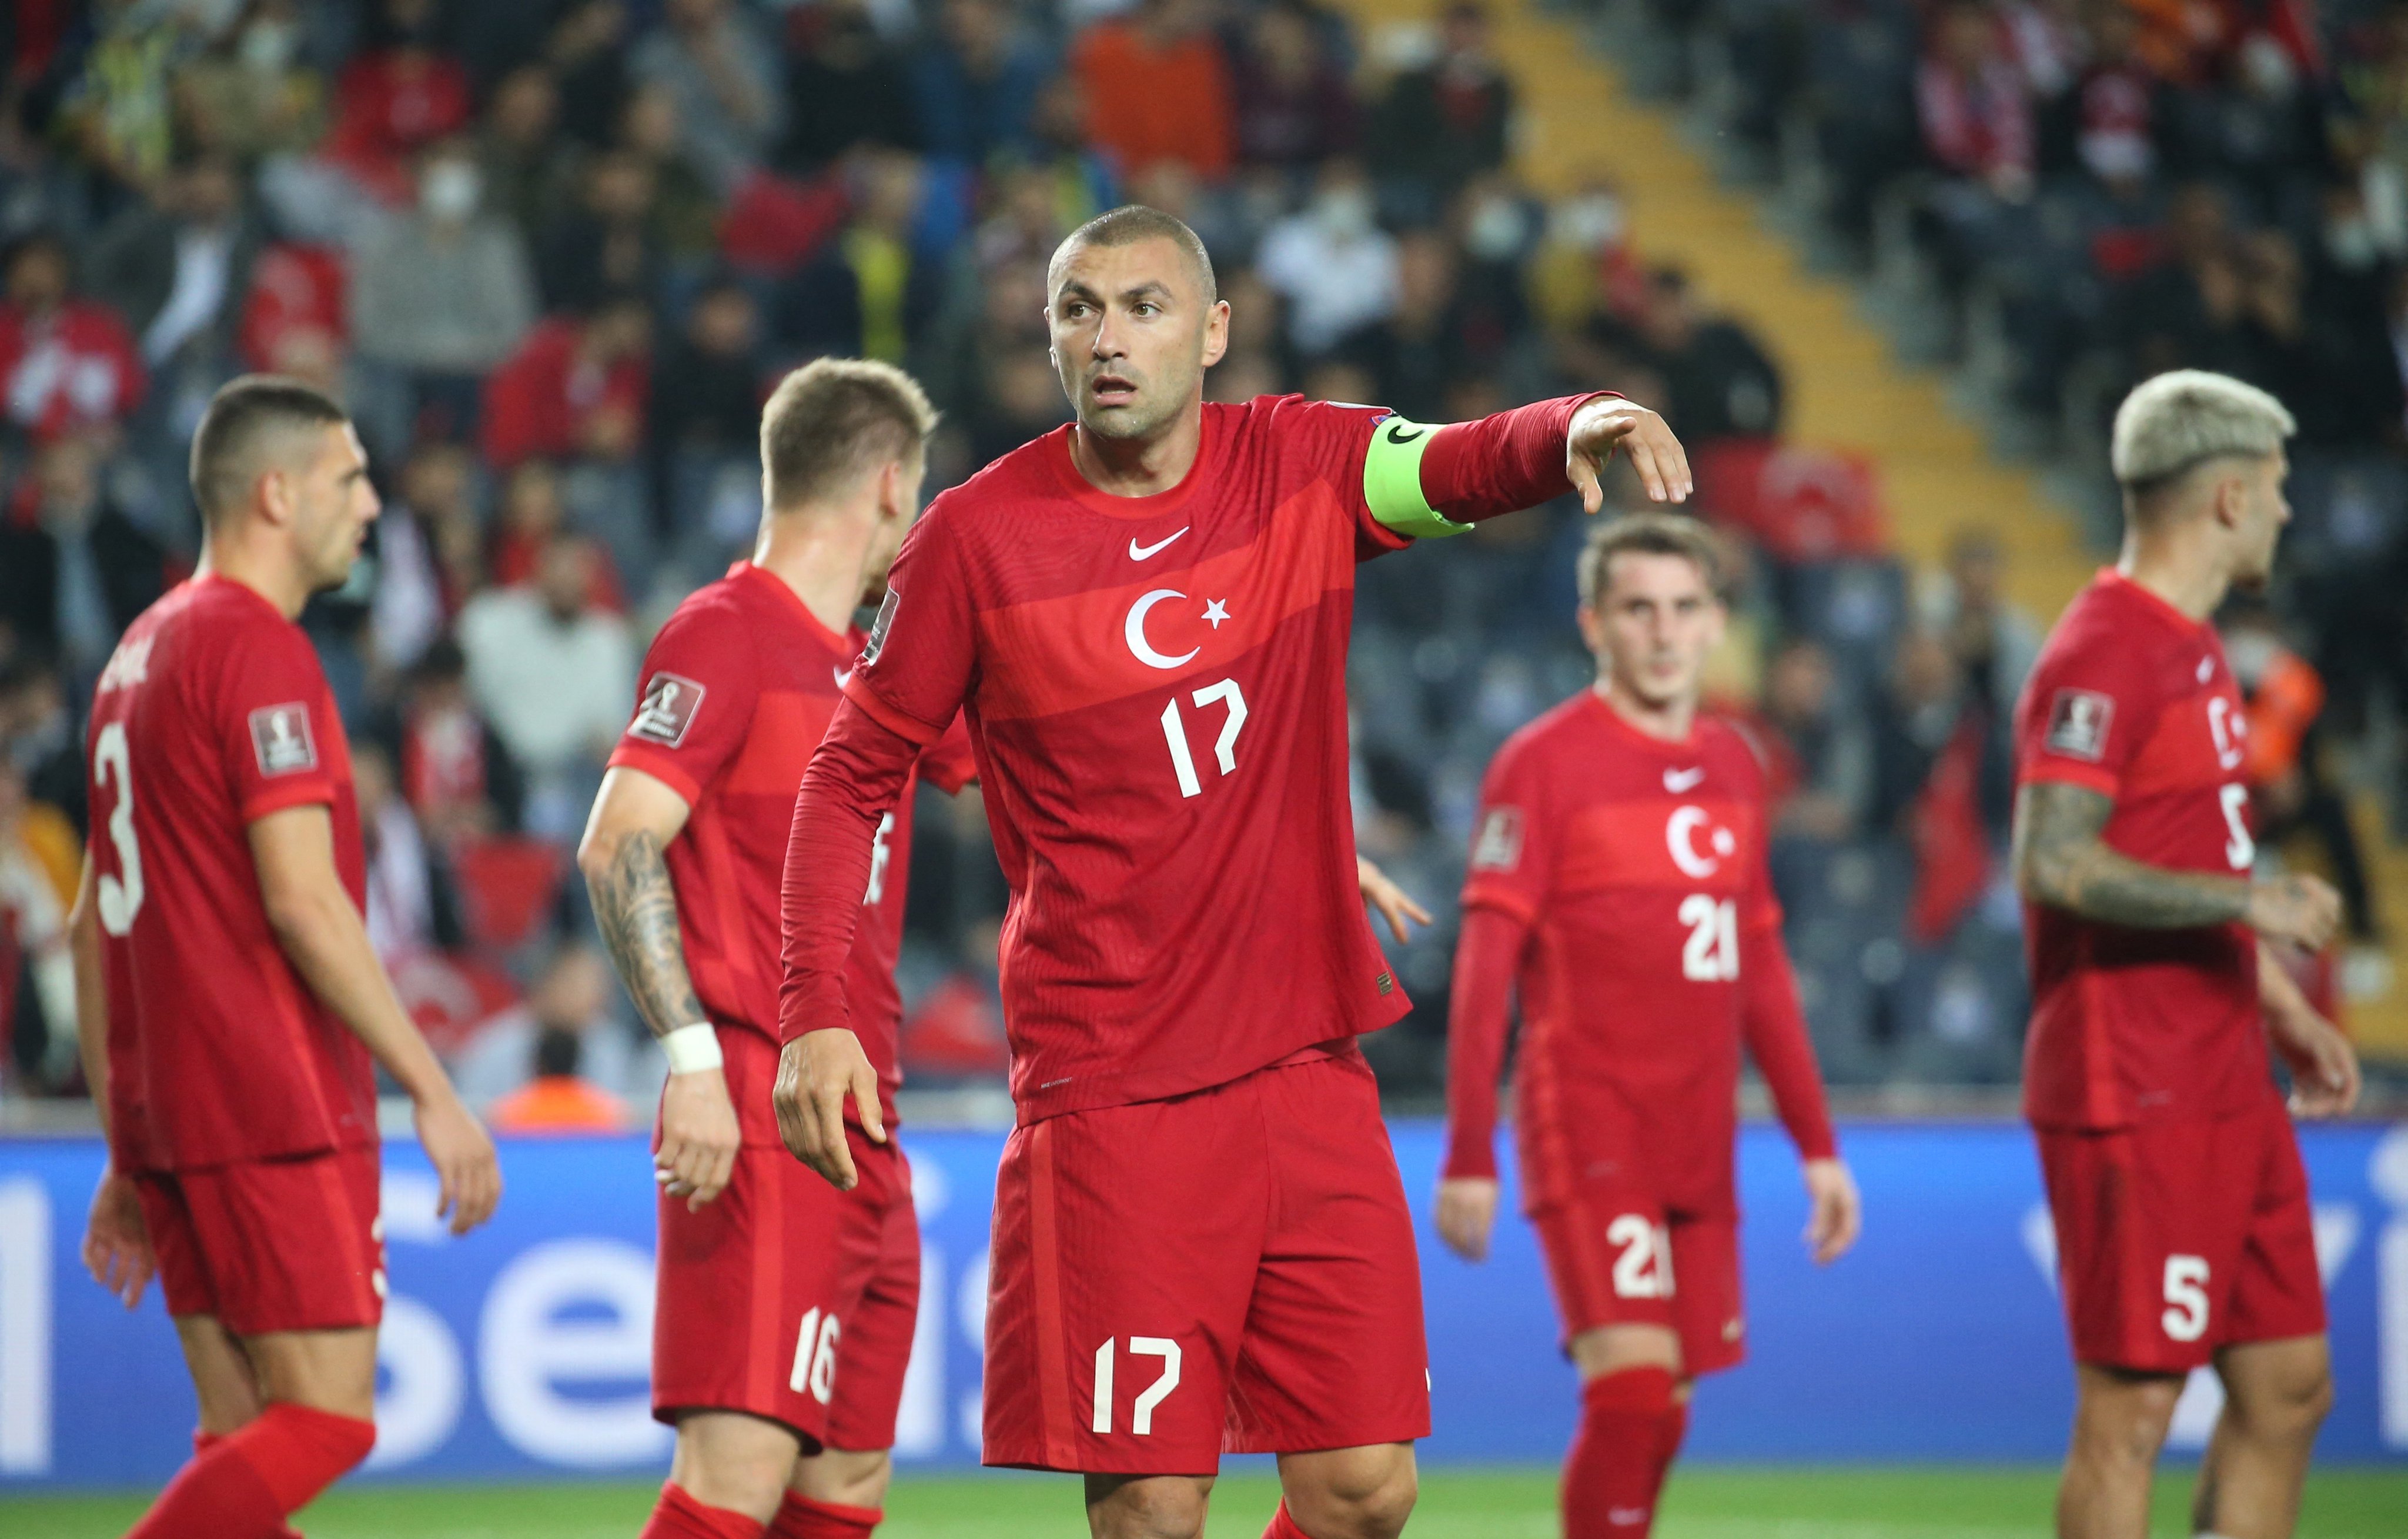 Wouldn’t want to quit like this but I don’t think it’s right to continue, confesses Burak Yilmaz